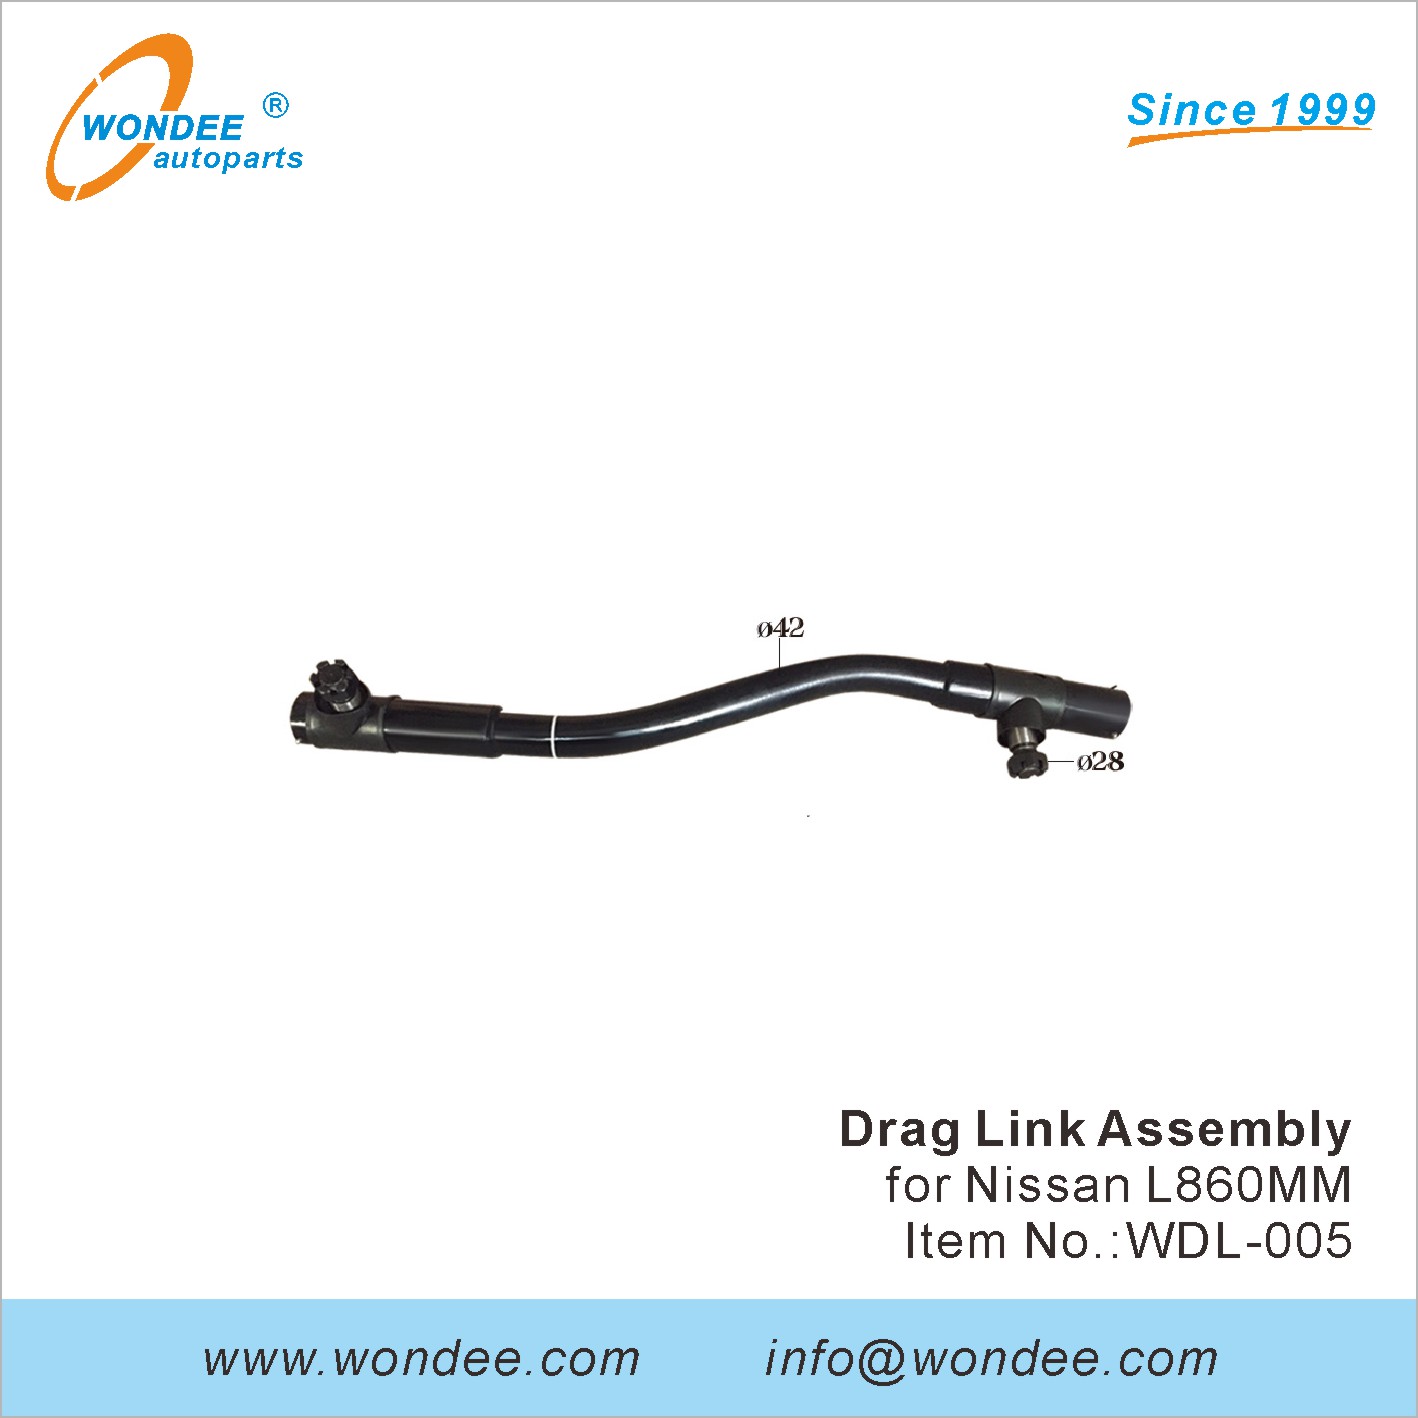 WONDEE drag link assembly (5)